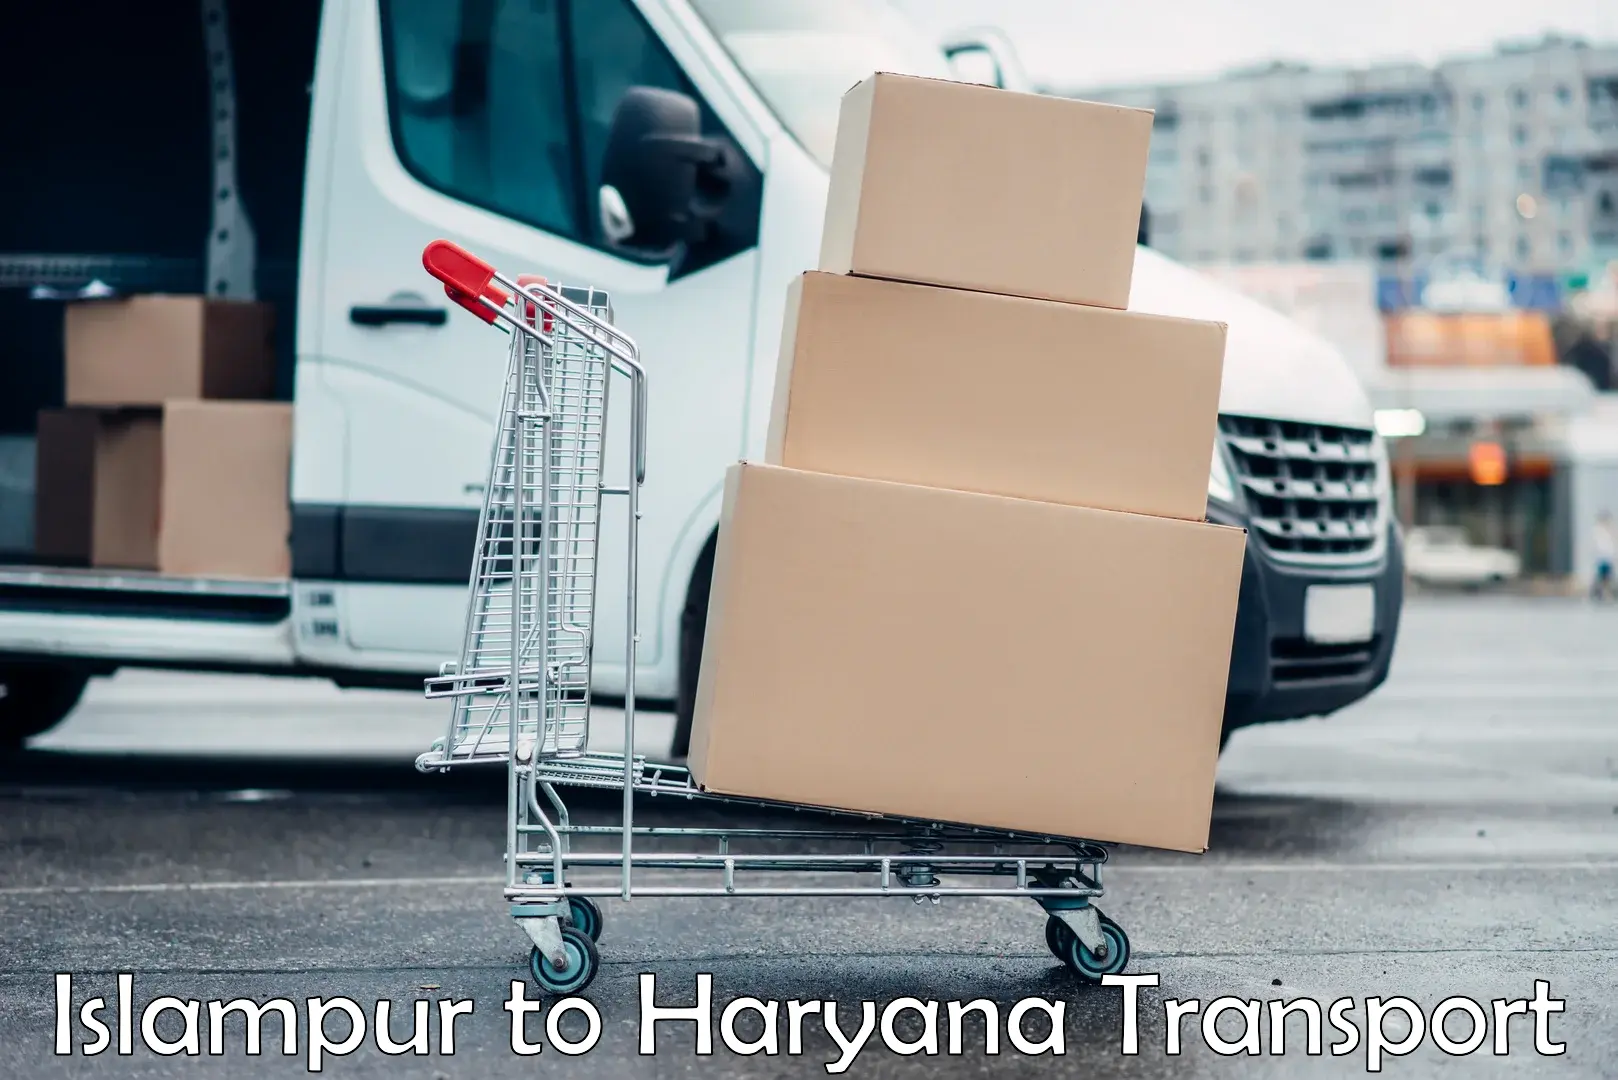 Goods delivery service Islampur to Chaudhary Charan Singh Haryana Agricultural University Hisar